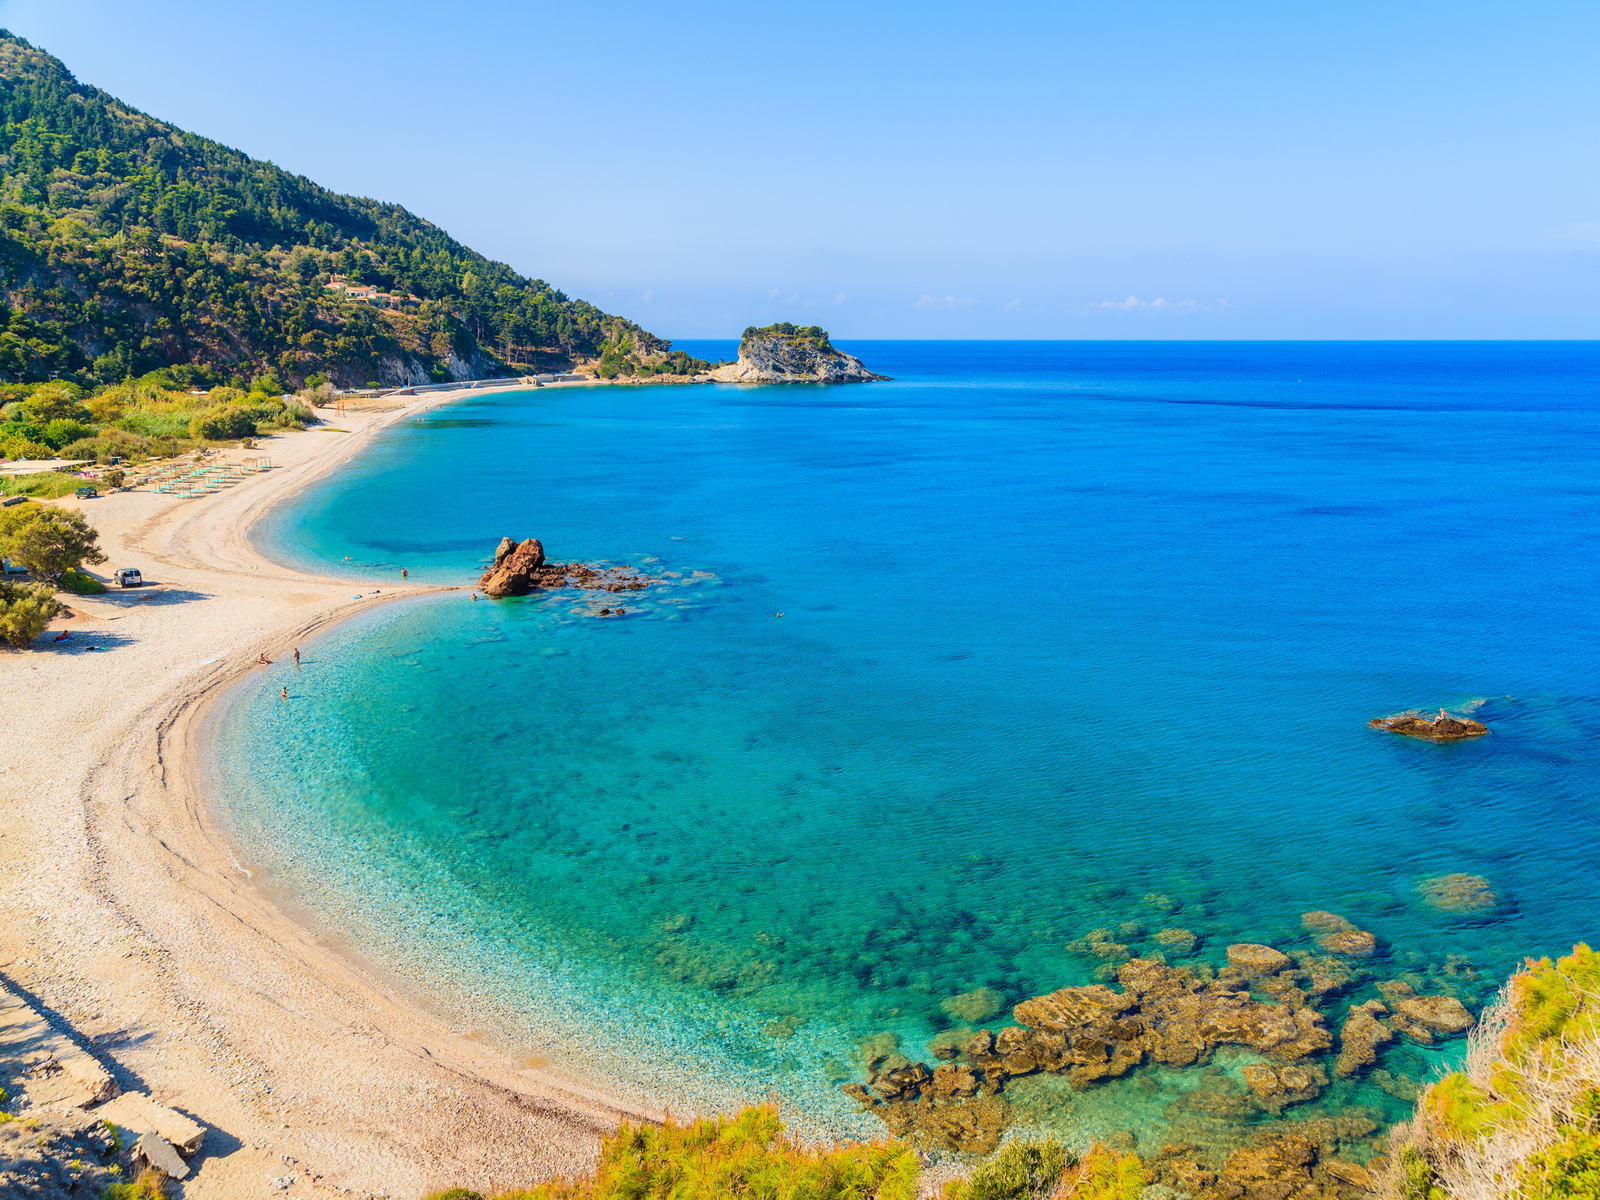 Potami, Samos, one of the best beaches in Greece, pictured from the top of the hillside